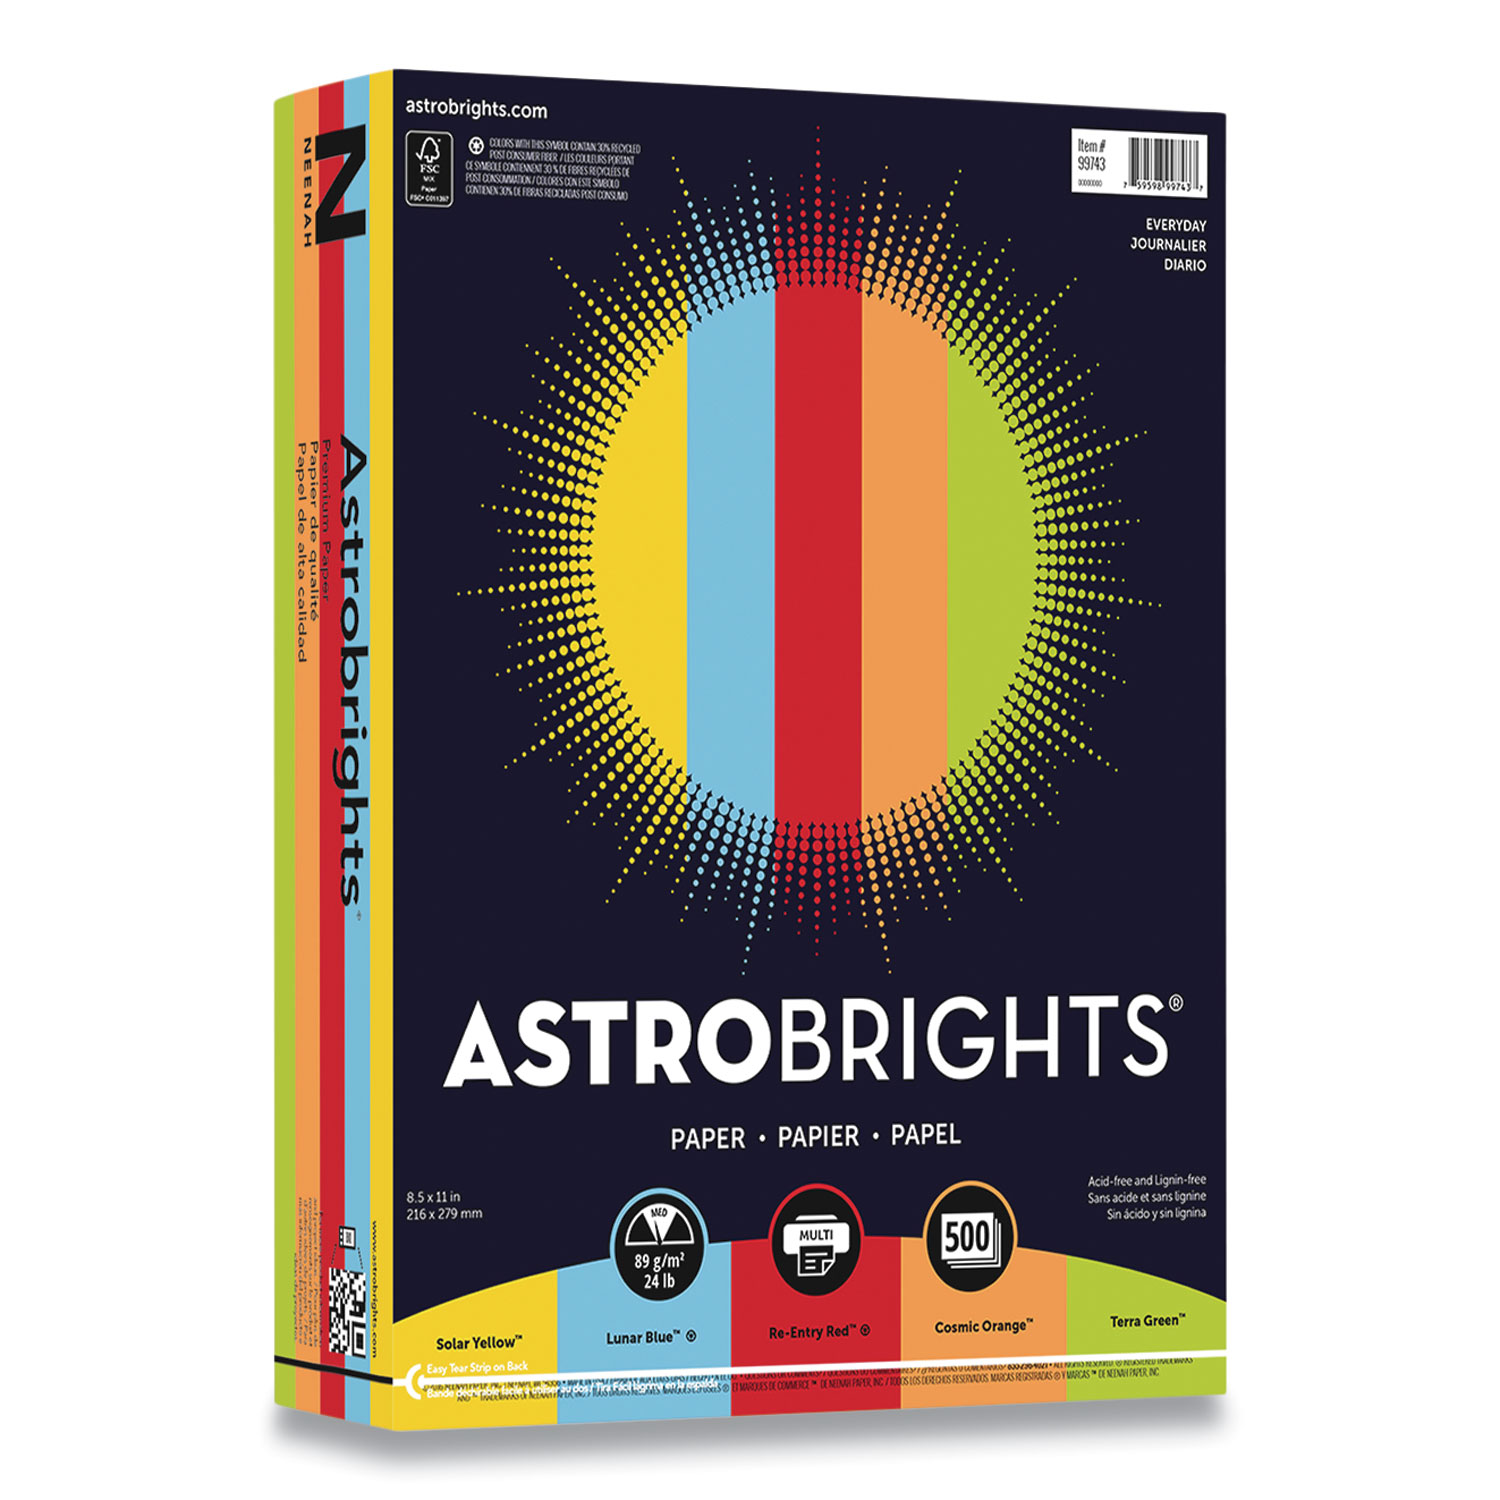  Astrobrights 99743-01 Color Paper, 24 lb, 8.5 x 11, Assorted Everyday Colors, 500/Ream (WAU24447819) 